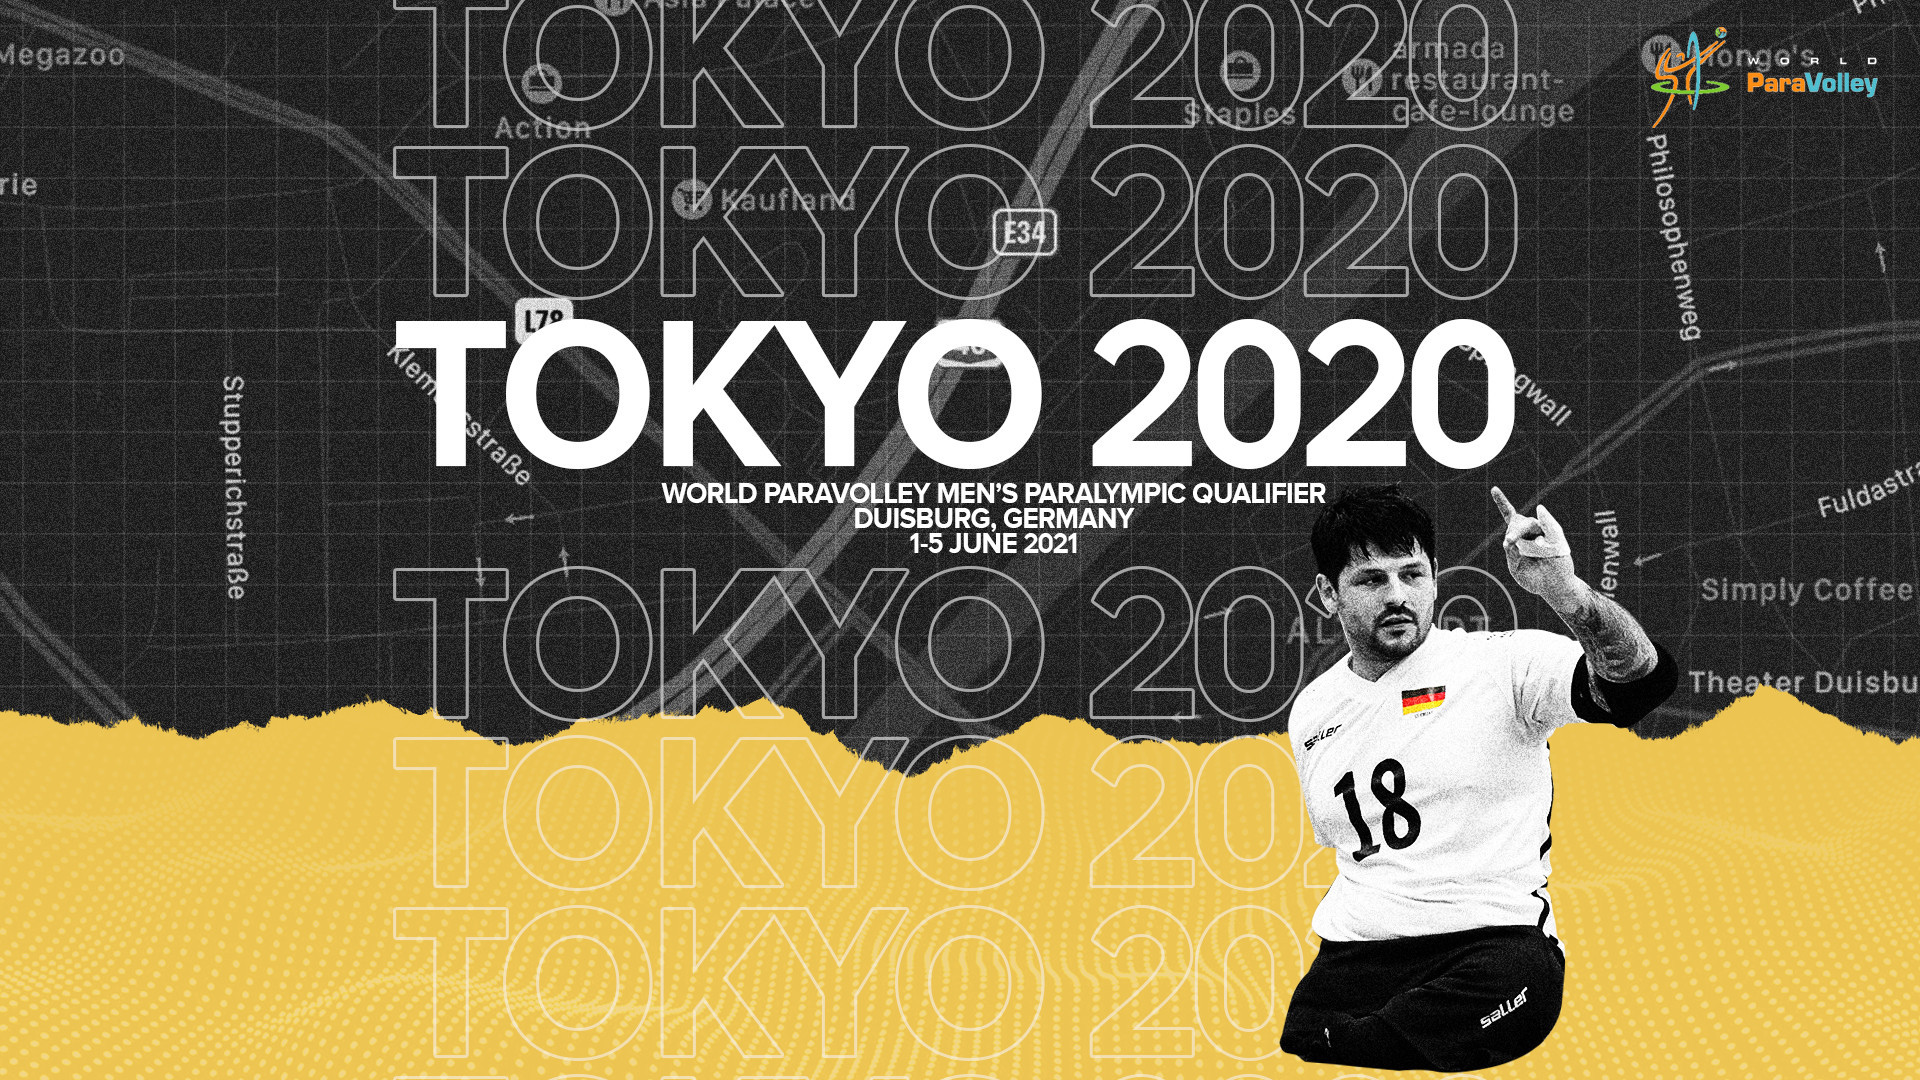 World ParaVolley confirms pools for final Tokyo 2020 sitting volleyball qualifier